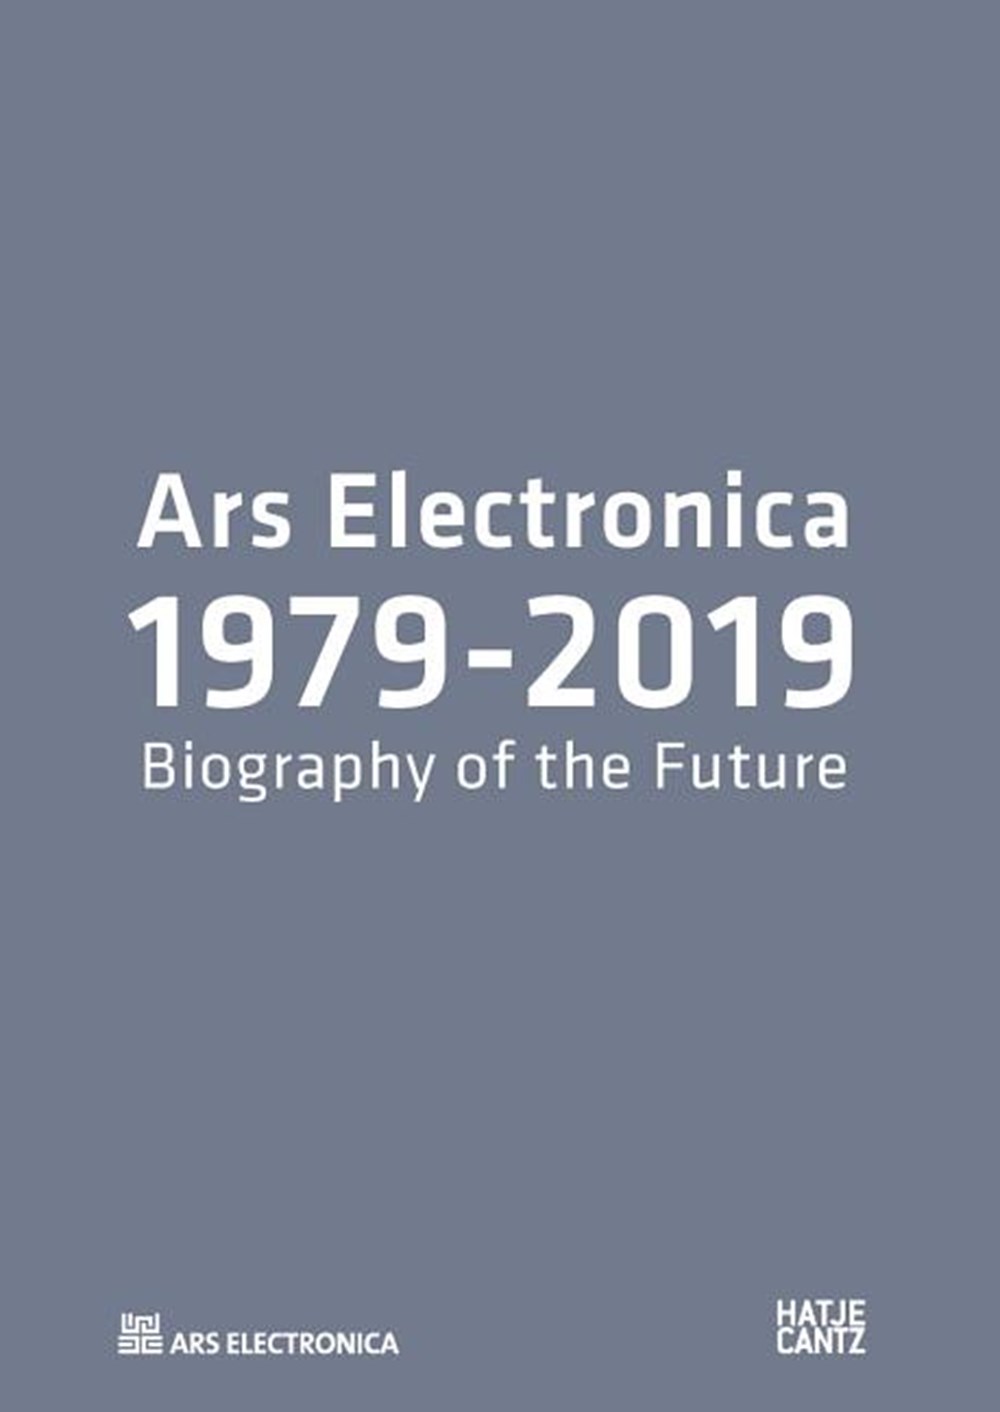 Ars Electronica 1979-2019: Biography of the Future